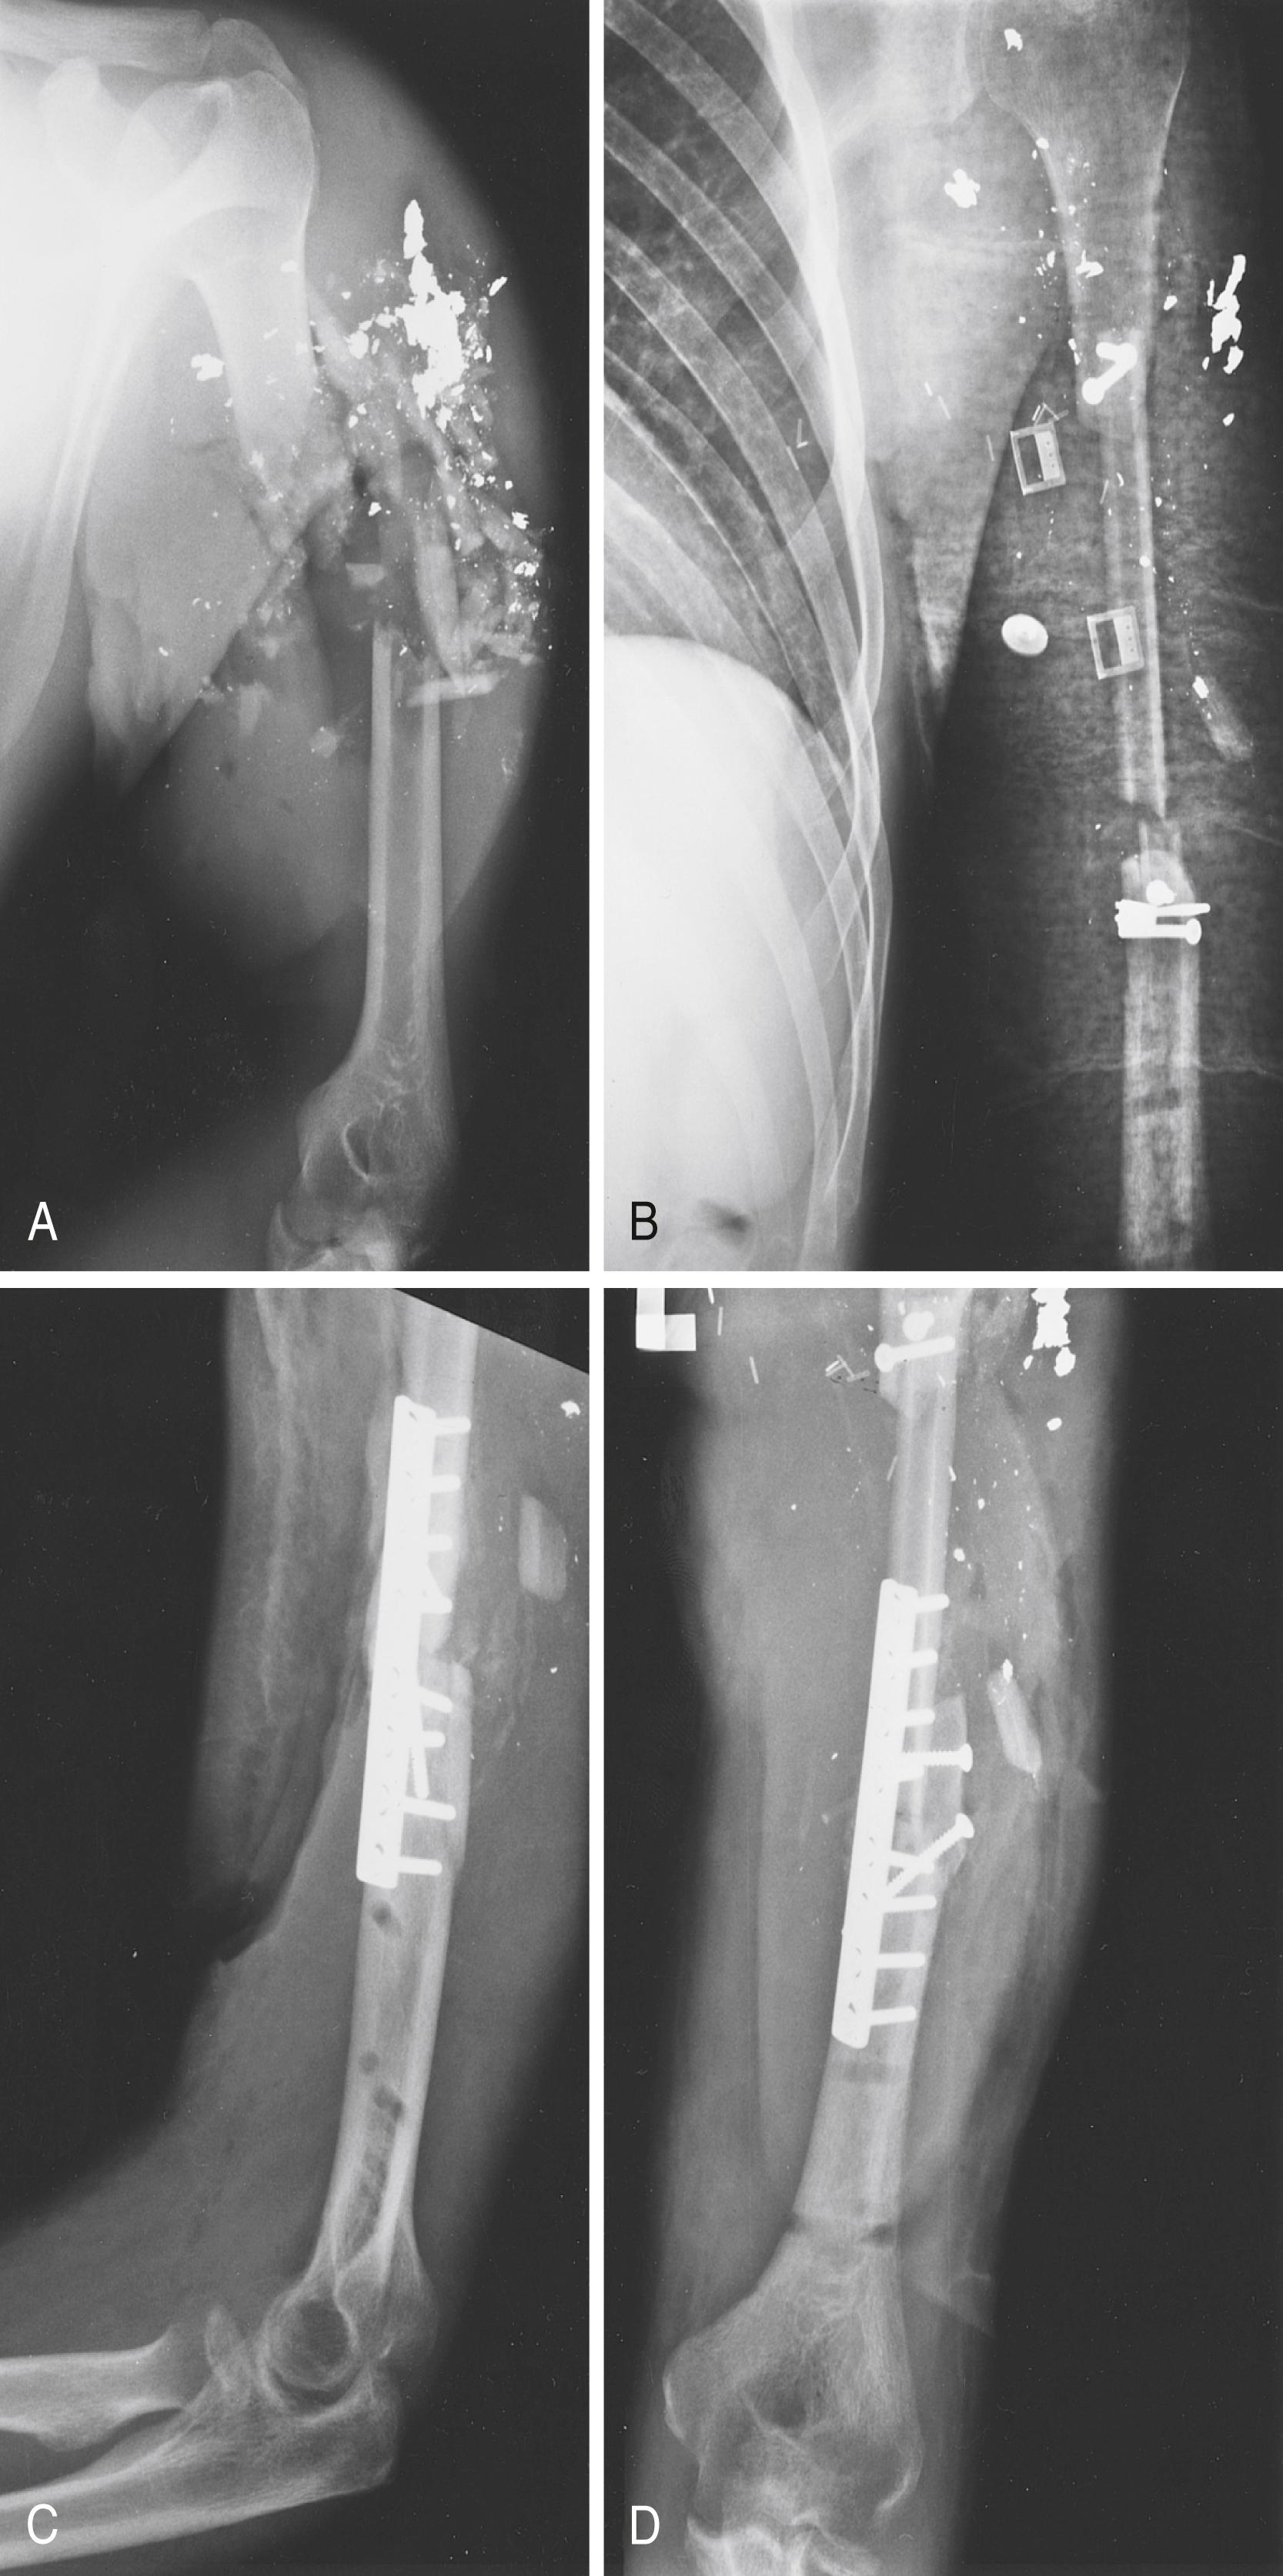 Fig. 46.3, Gunshot wound in a 23-year-old man. A, Fragmentation of the humeral diaphysis before debridement. A large anterior wound was closed with a pedicled latissimus dorsi flap placed as an elbow flexorplasty to replace the missing biceps. B, A simultaneous fibular graft reconstructed the bone defect. A stress fracture occurred shortly after removal of a bridging external fixator several months later. C and D, Supplemental onlay bone grafting a plate fixation allowed healing of the fibula.